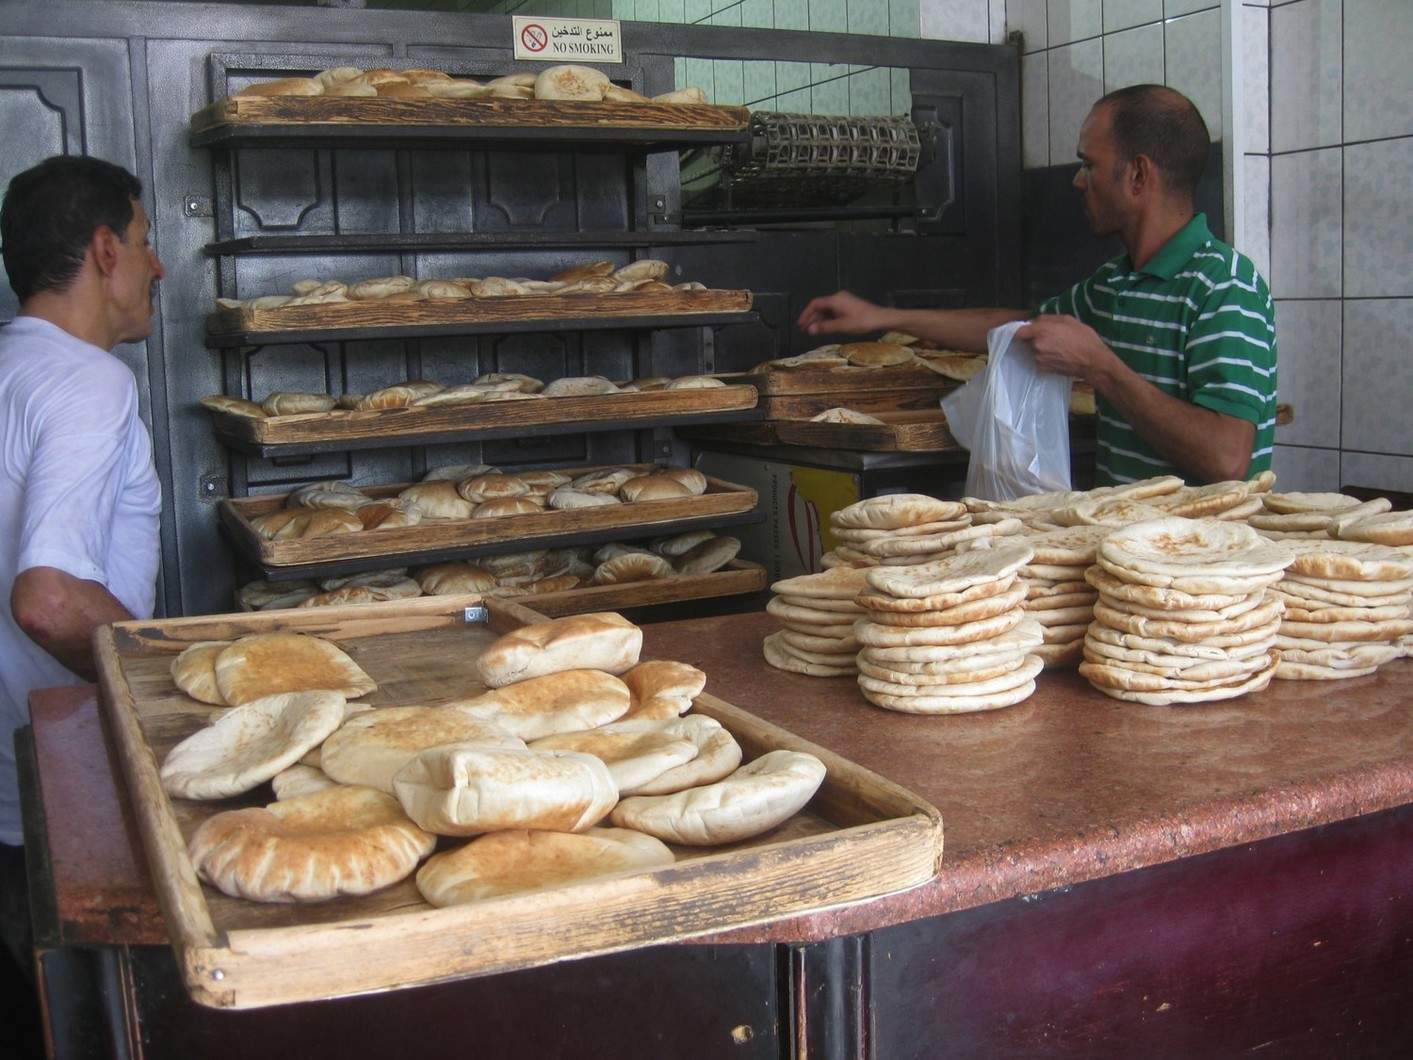 Much of José Ciro Martínez’s fellowship time at ACOR was spent in Amman bakeries, such as this one near Sports City, where he was able to gather valuable information about the role of bread and bakeries in the daily rhythms of the city’s residents.